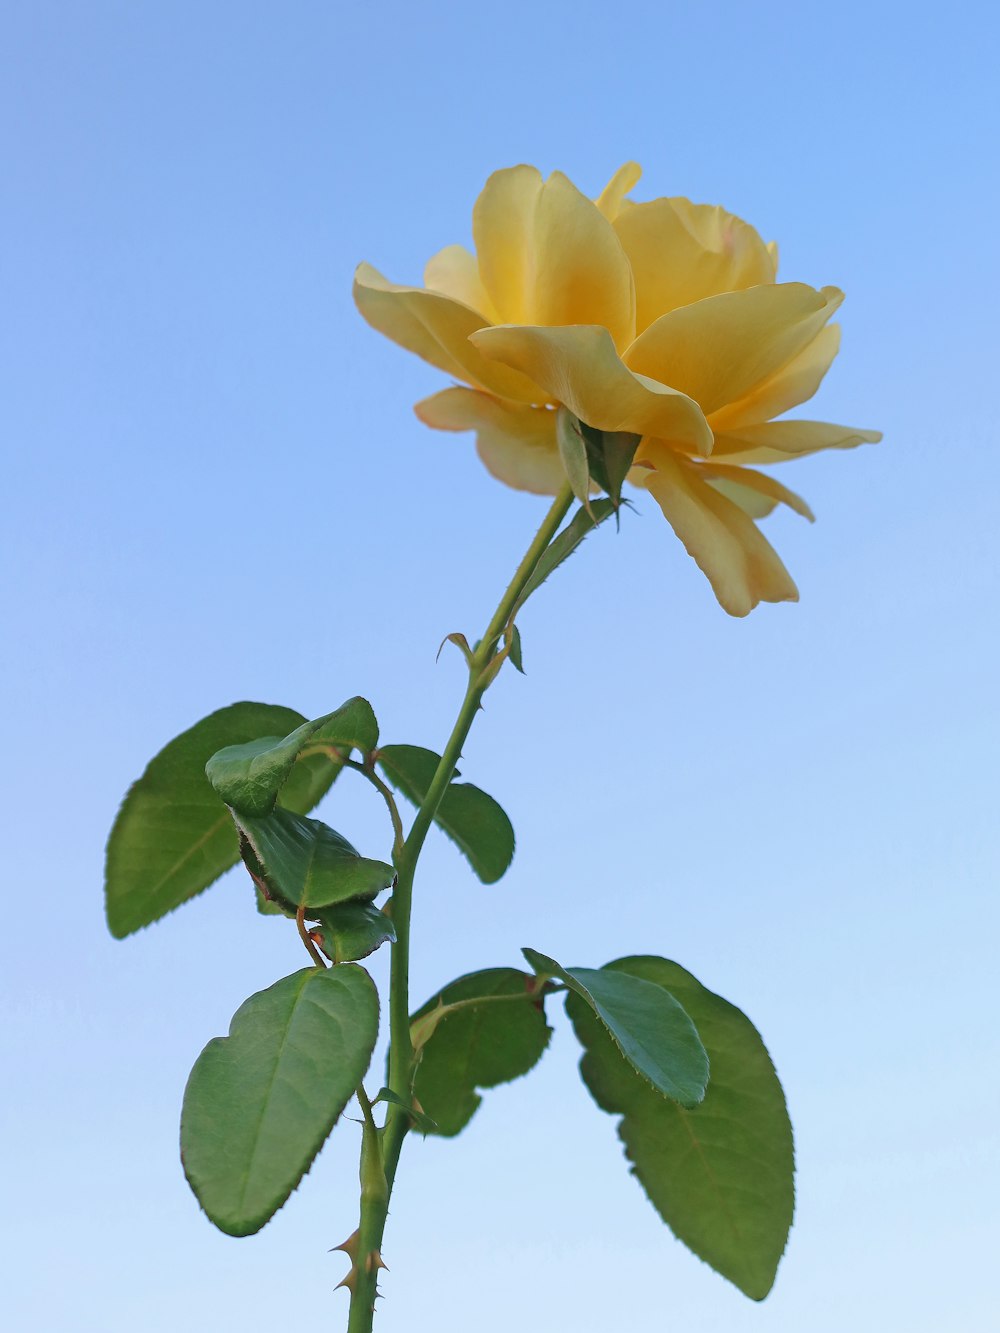 a single yellow rose with green leaves against a blue sky